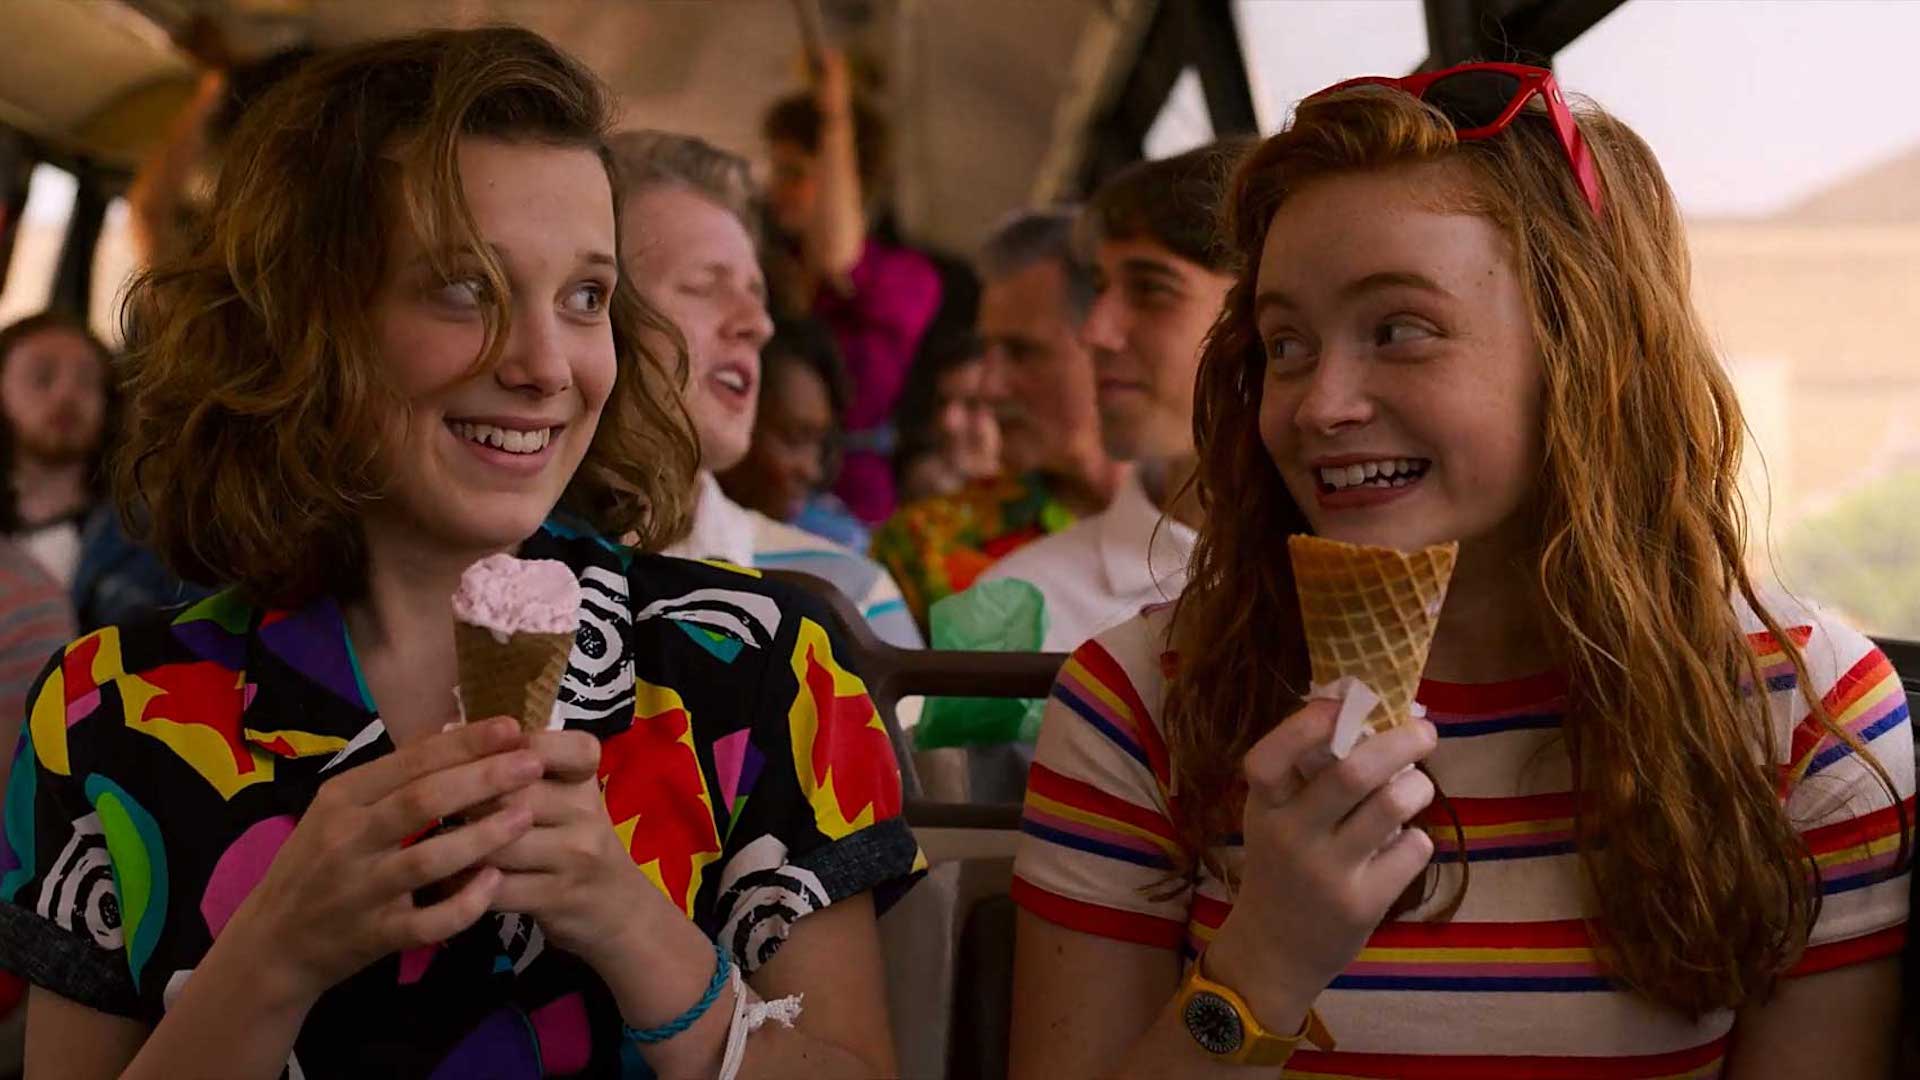 Eleven and Max eating ice cream